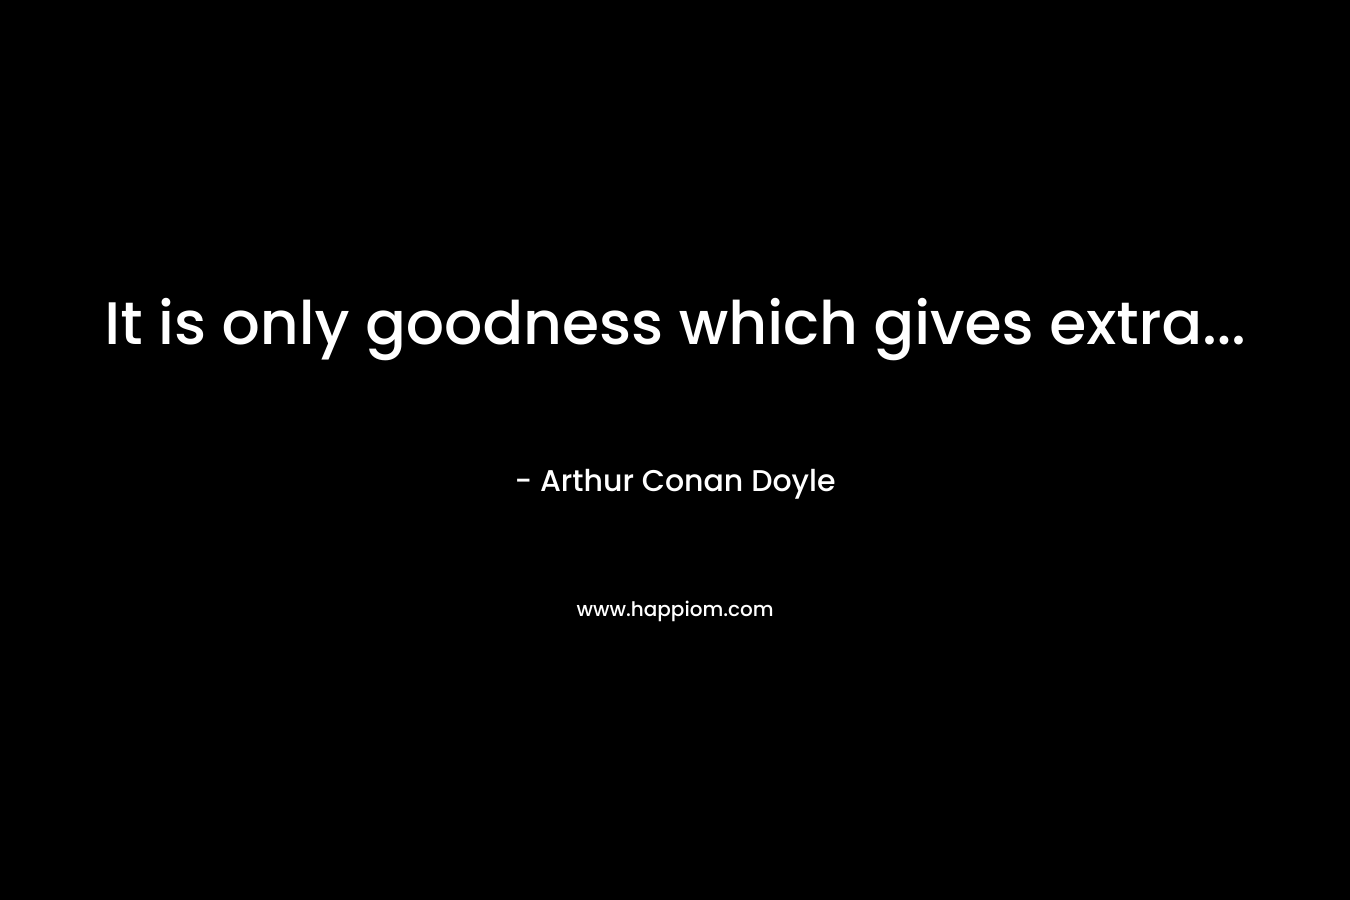 It is only goodness which gives extra...